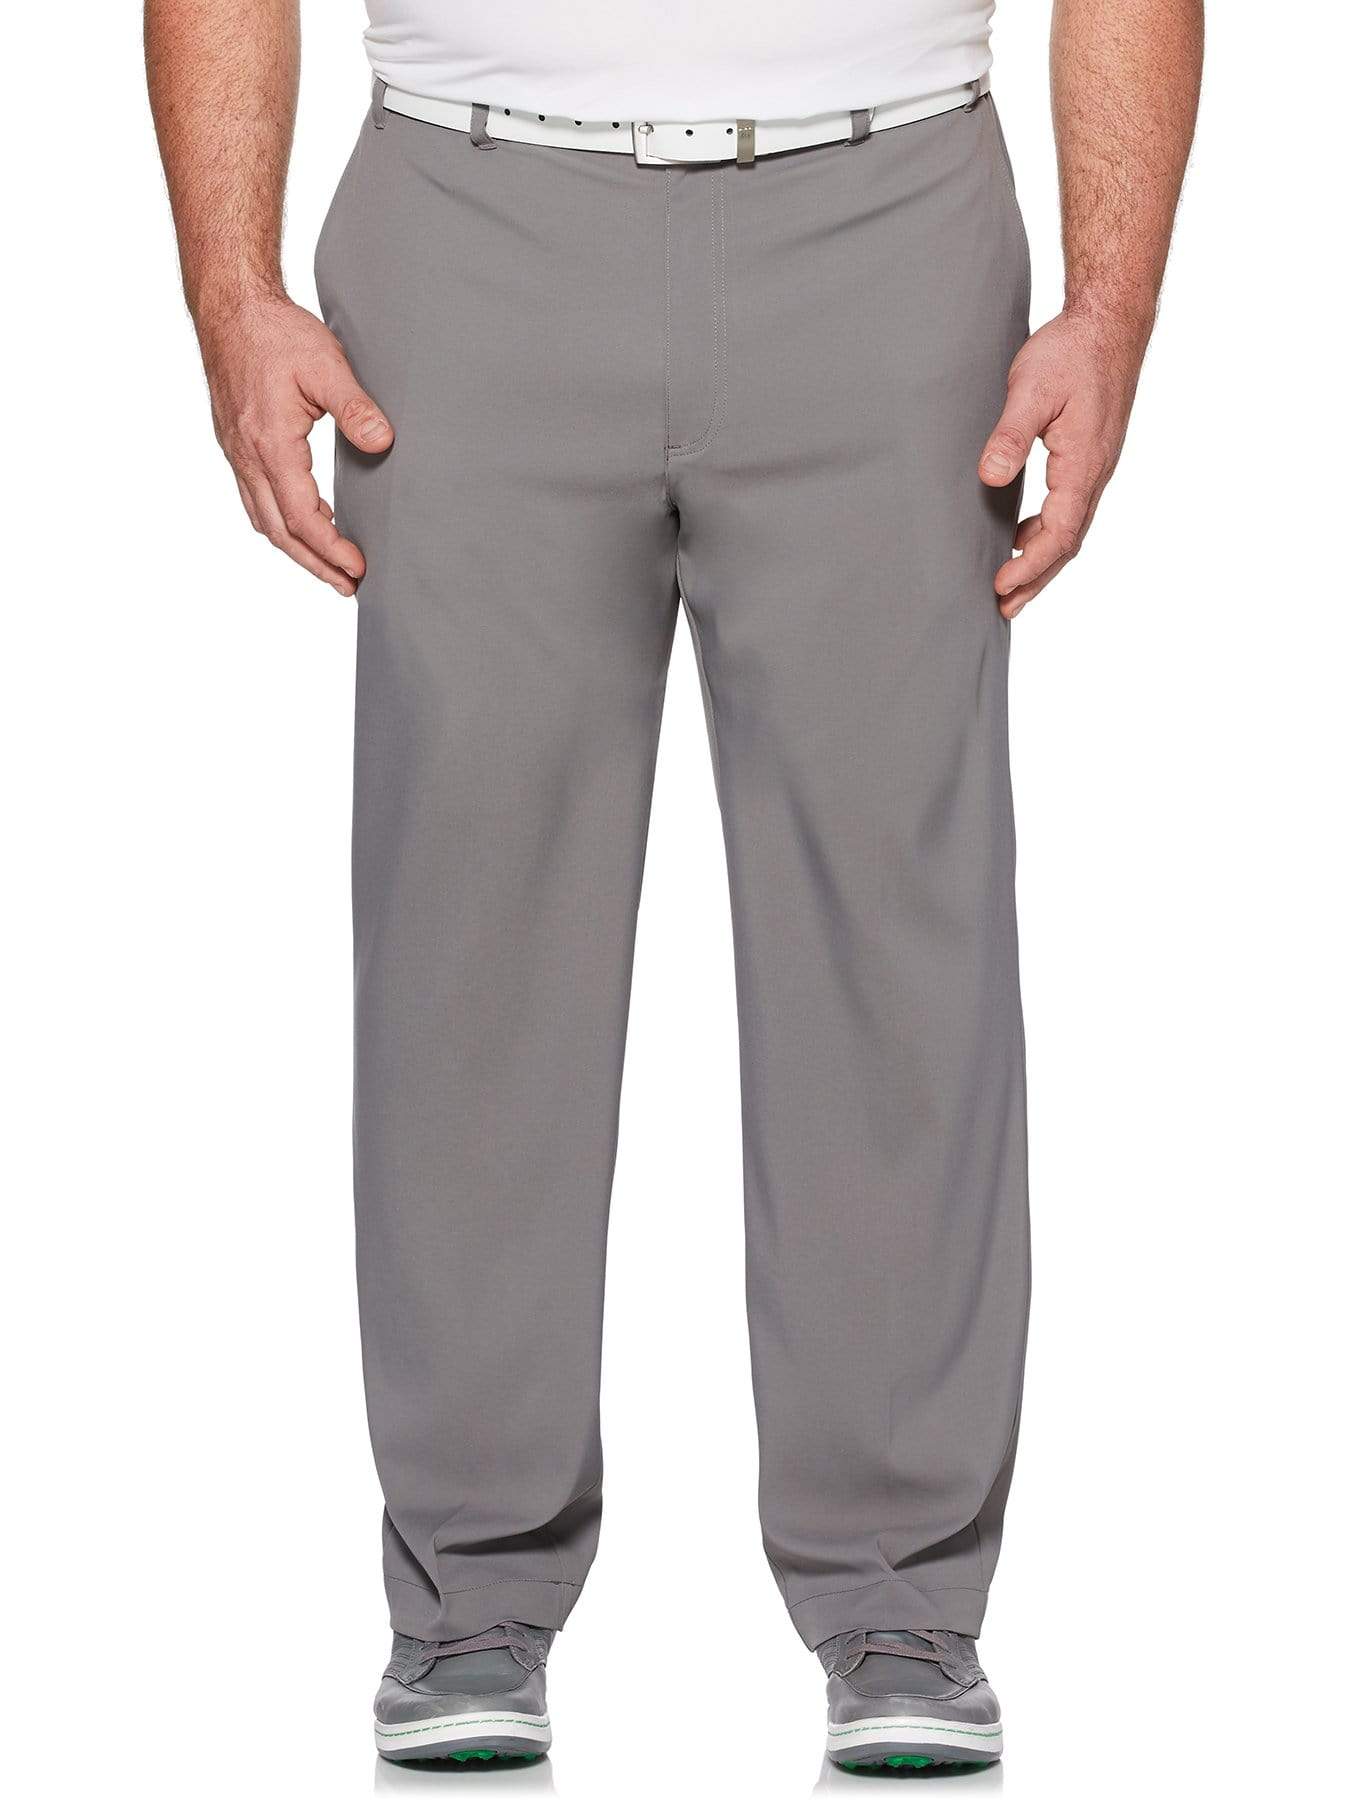 32 Degrees Pants Adult 38 x 34 Stretch Performance Gray Golf Active Bottoms  Mens 